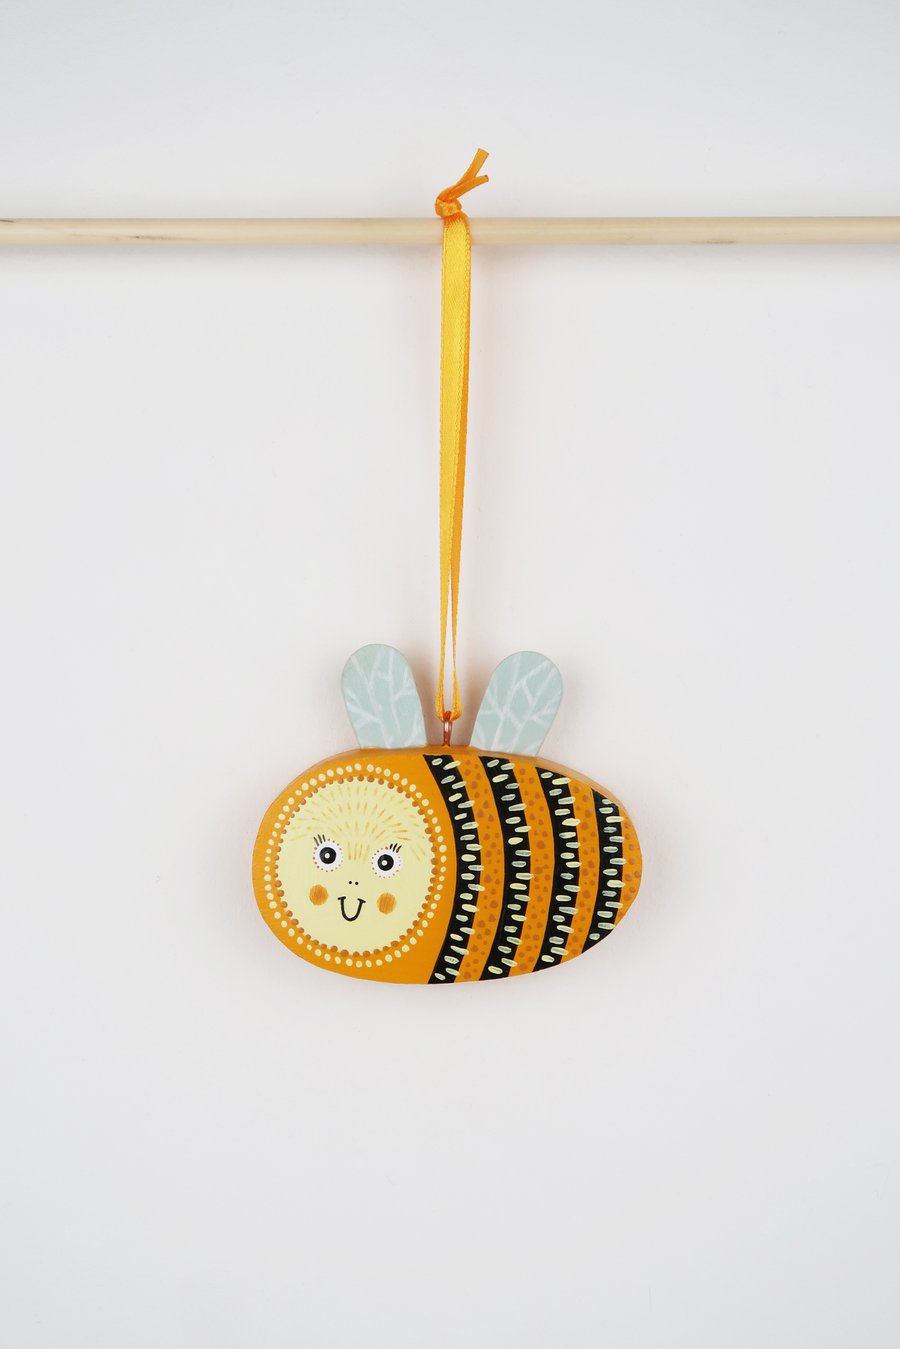 Bee hanging decoration, wooden insect ornament, cute spring decor